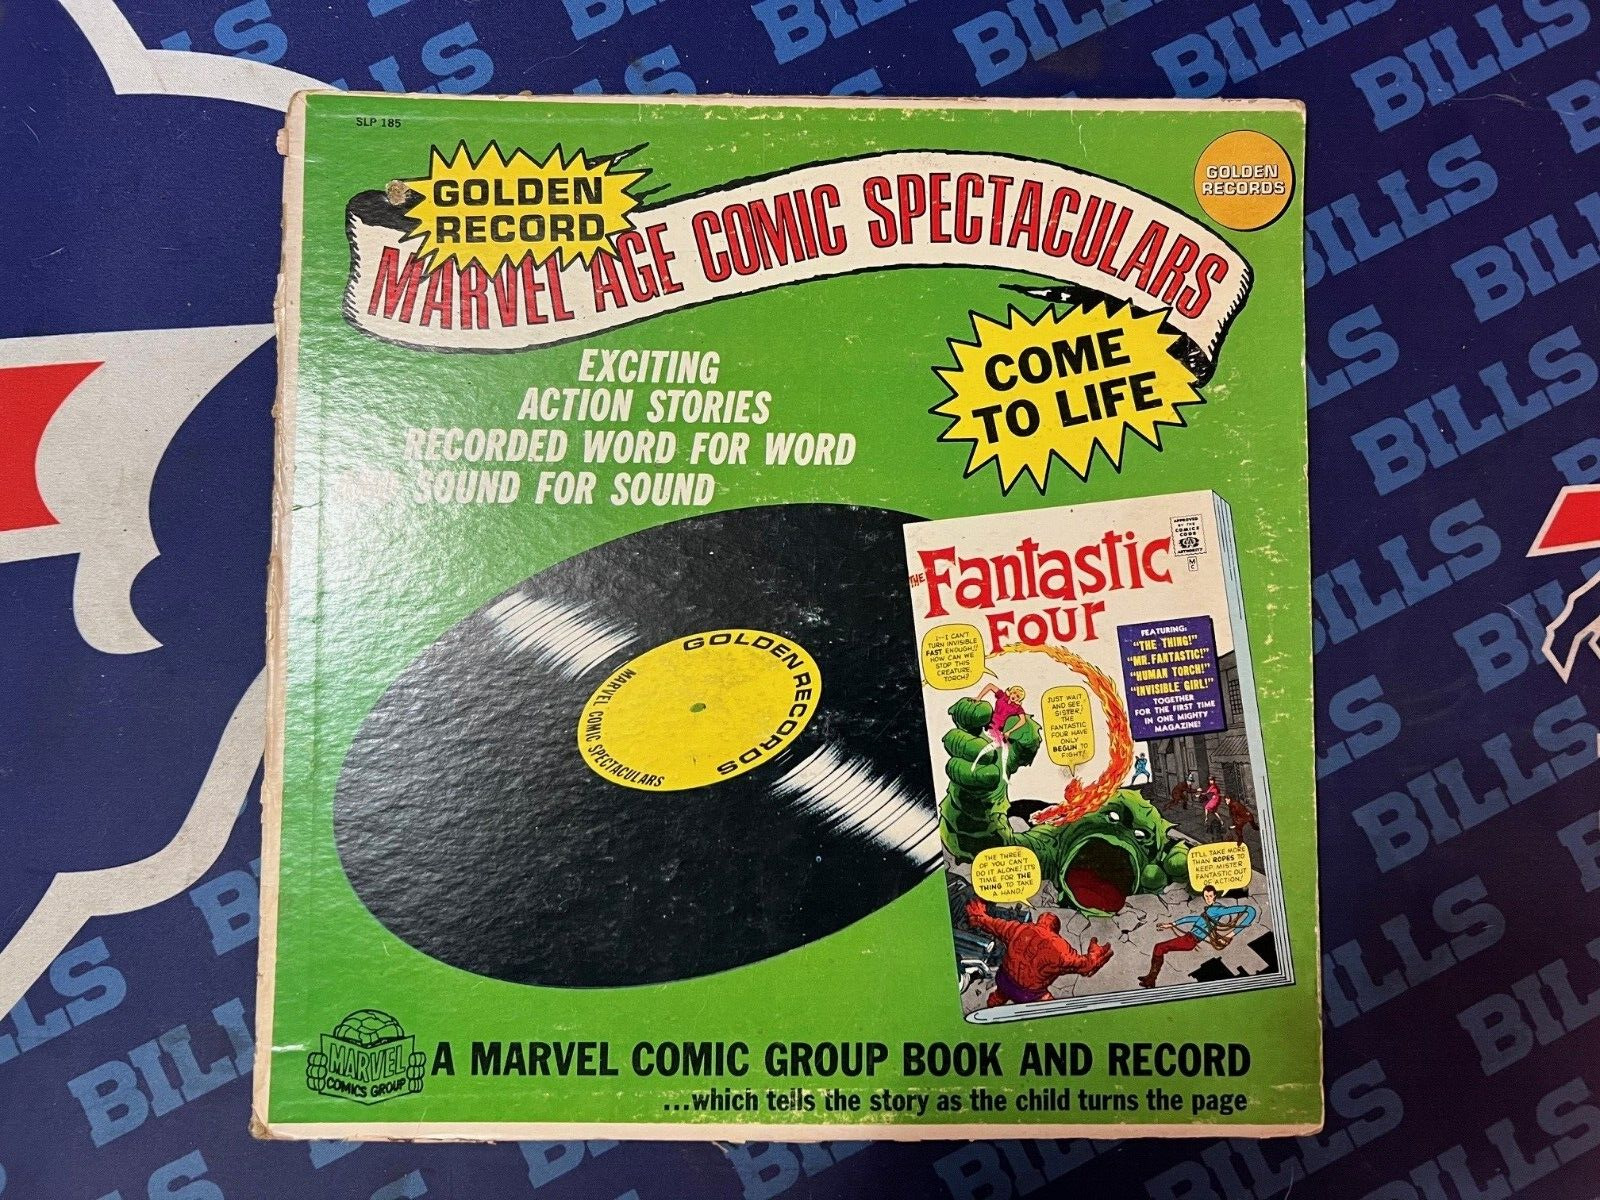 Golden Record Marvel Silver Age Comics Spectaculars Fantastic Four 1 1966